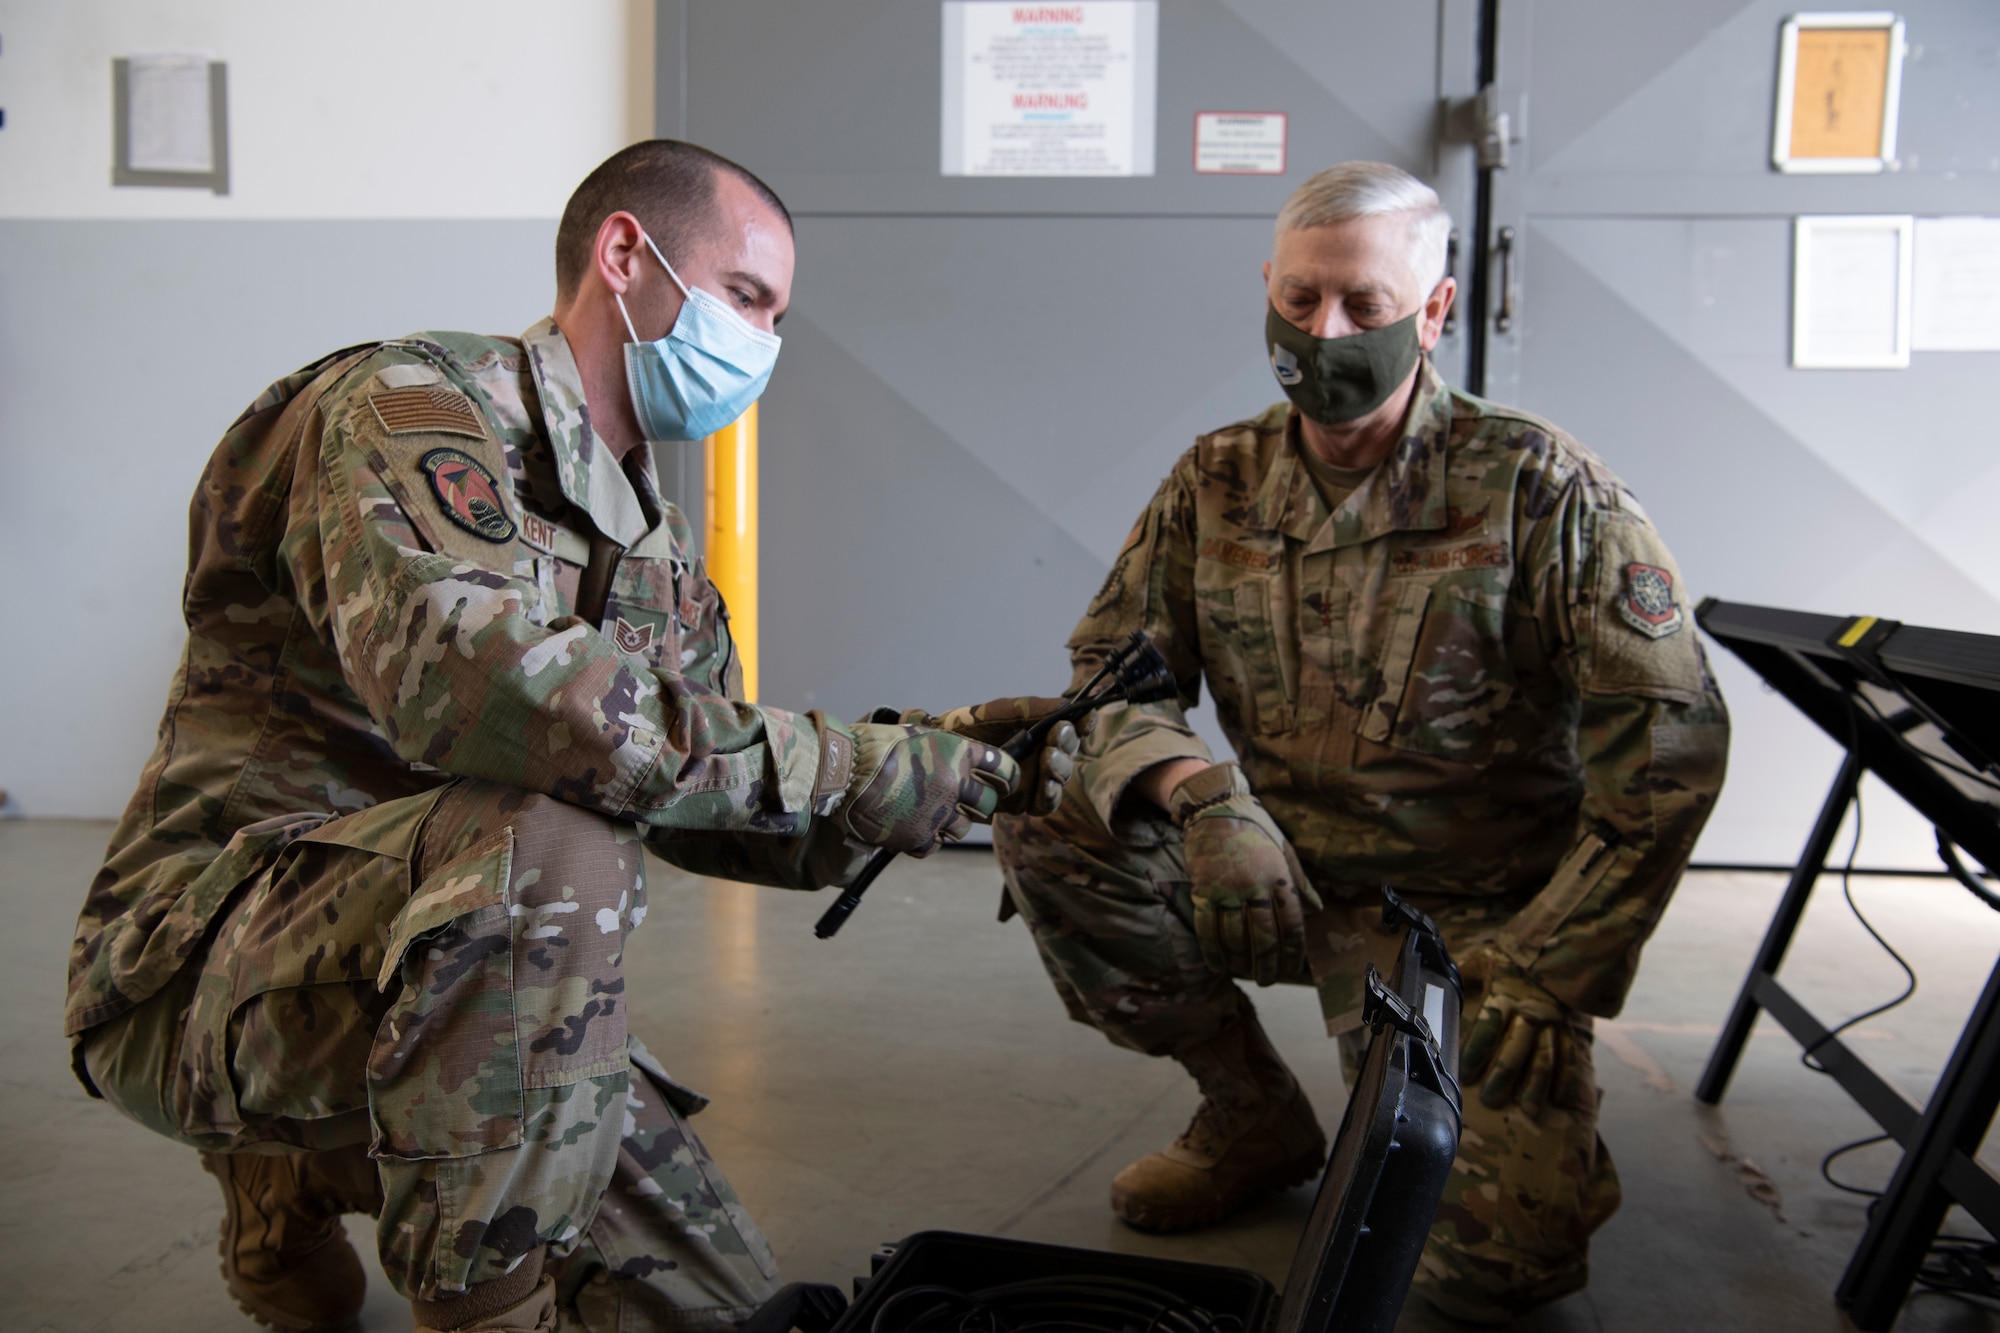 An Airman shows another Airman how to set up solar panels.